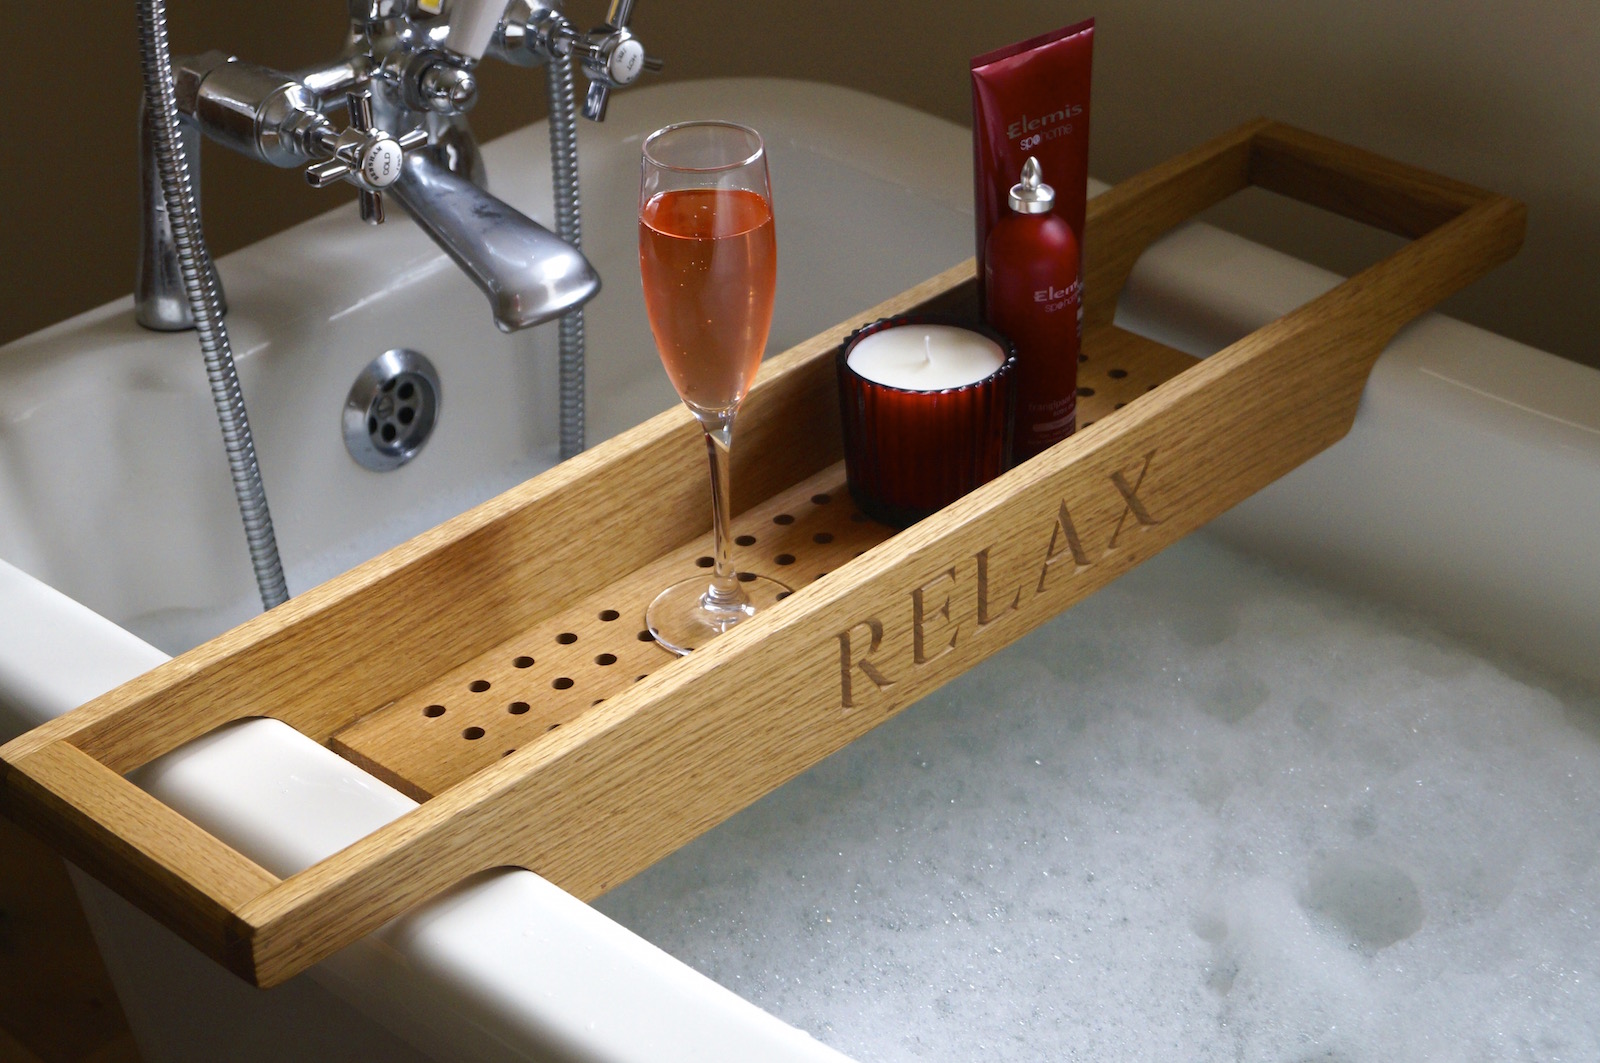 Personalised Wooden Bath Racks: The Perfect Christmas Gift 